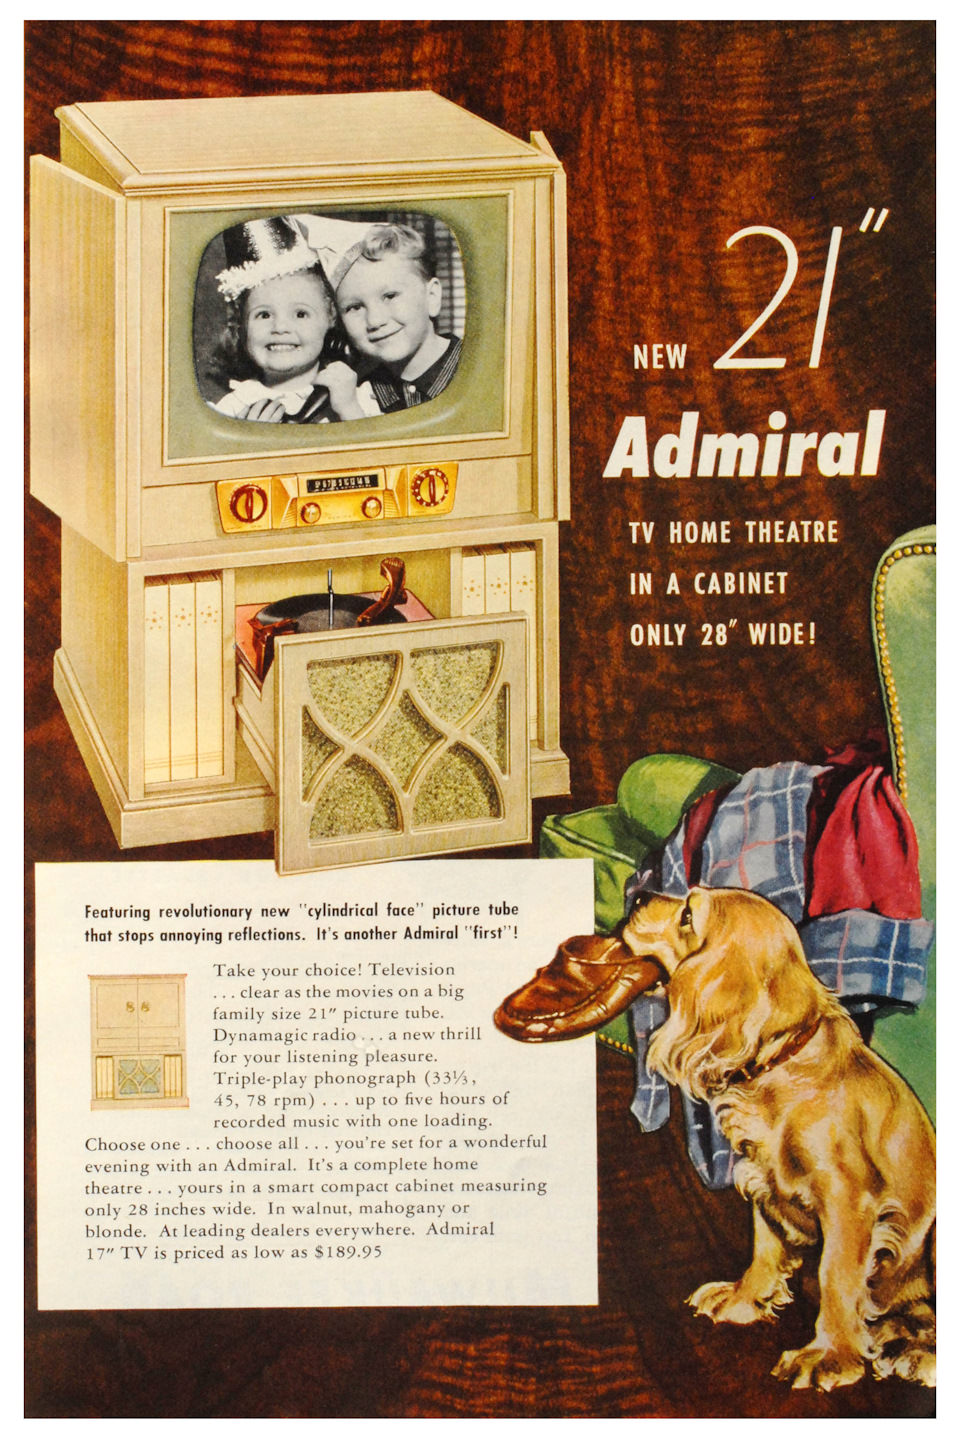 Vintage Ads of Admiral Televisions From the 1950s